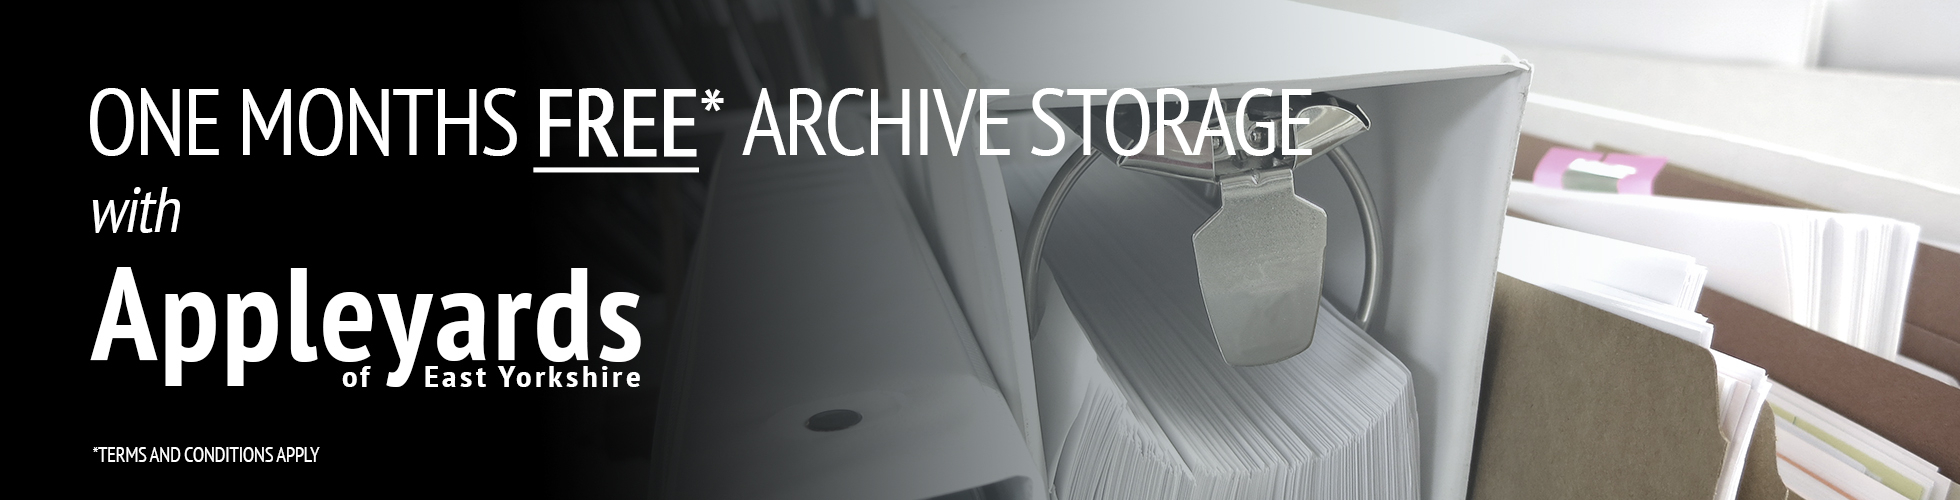 One month free archive storage